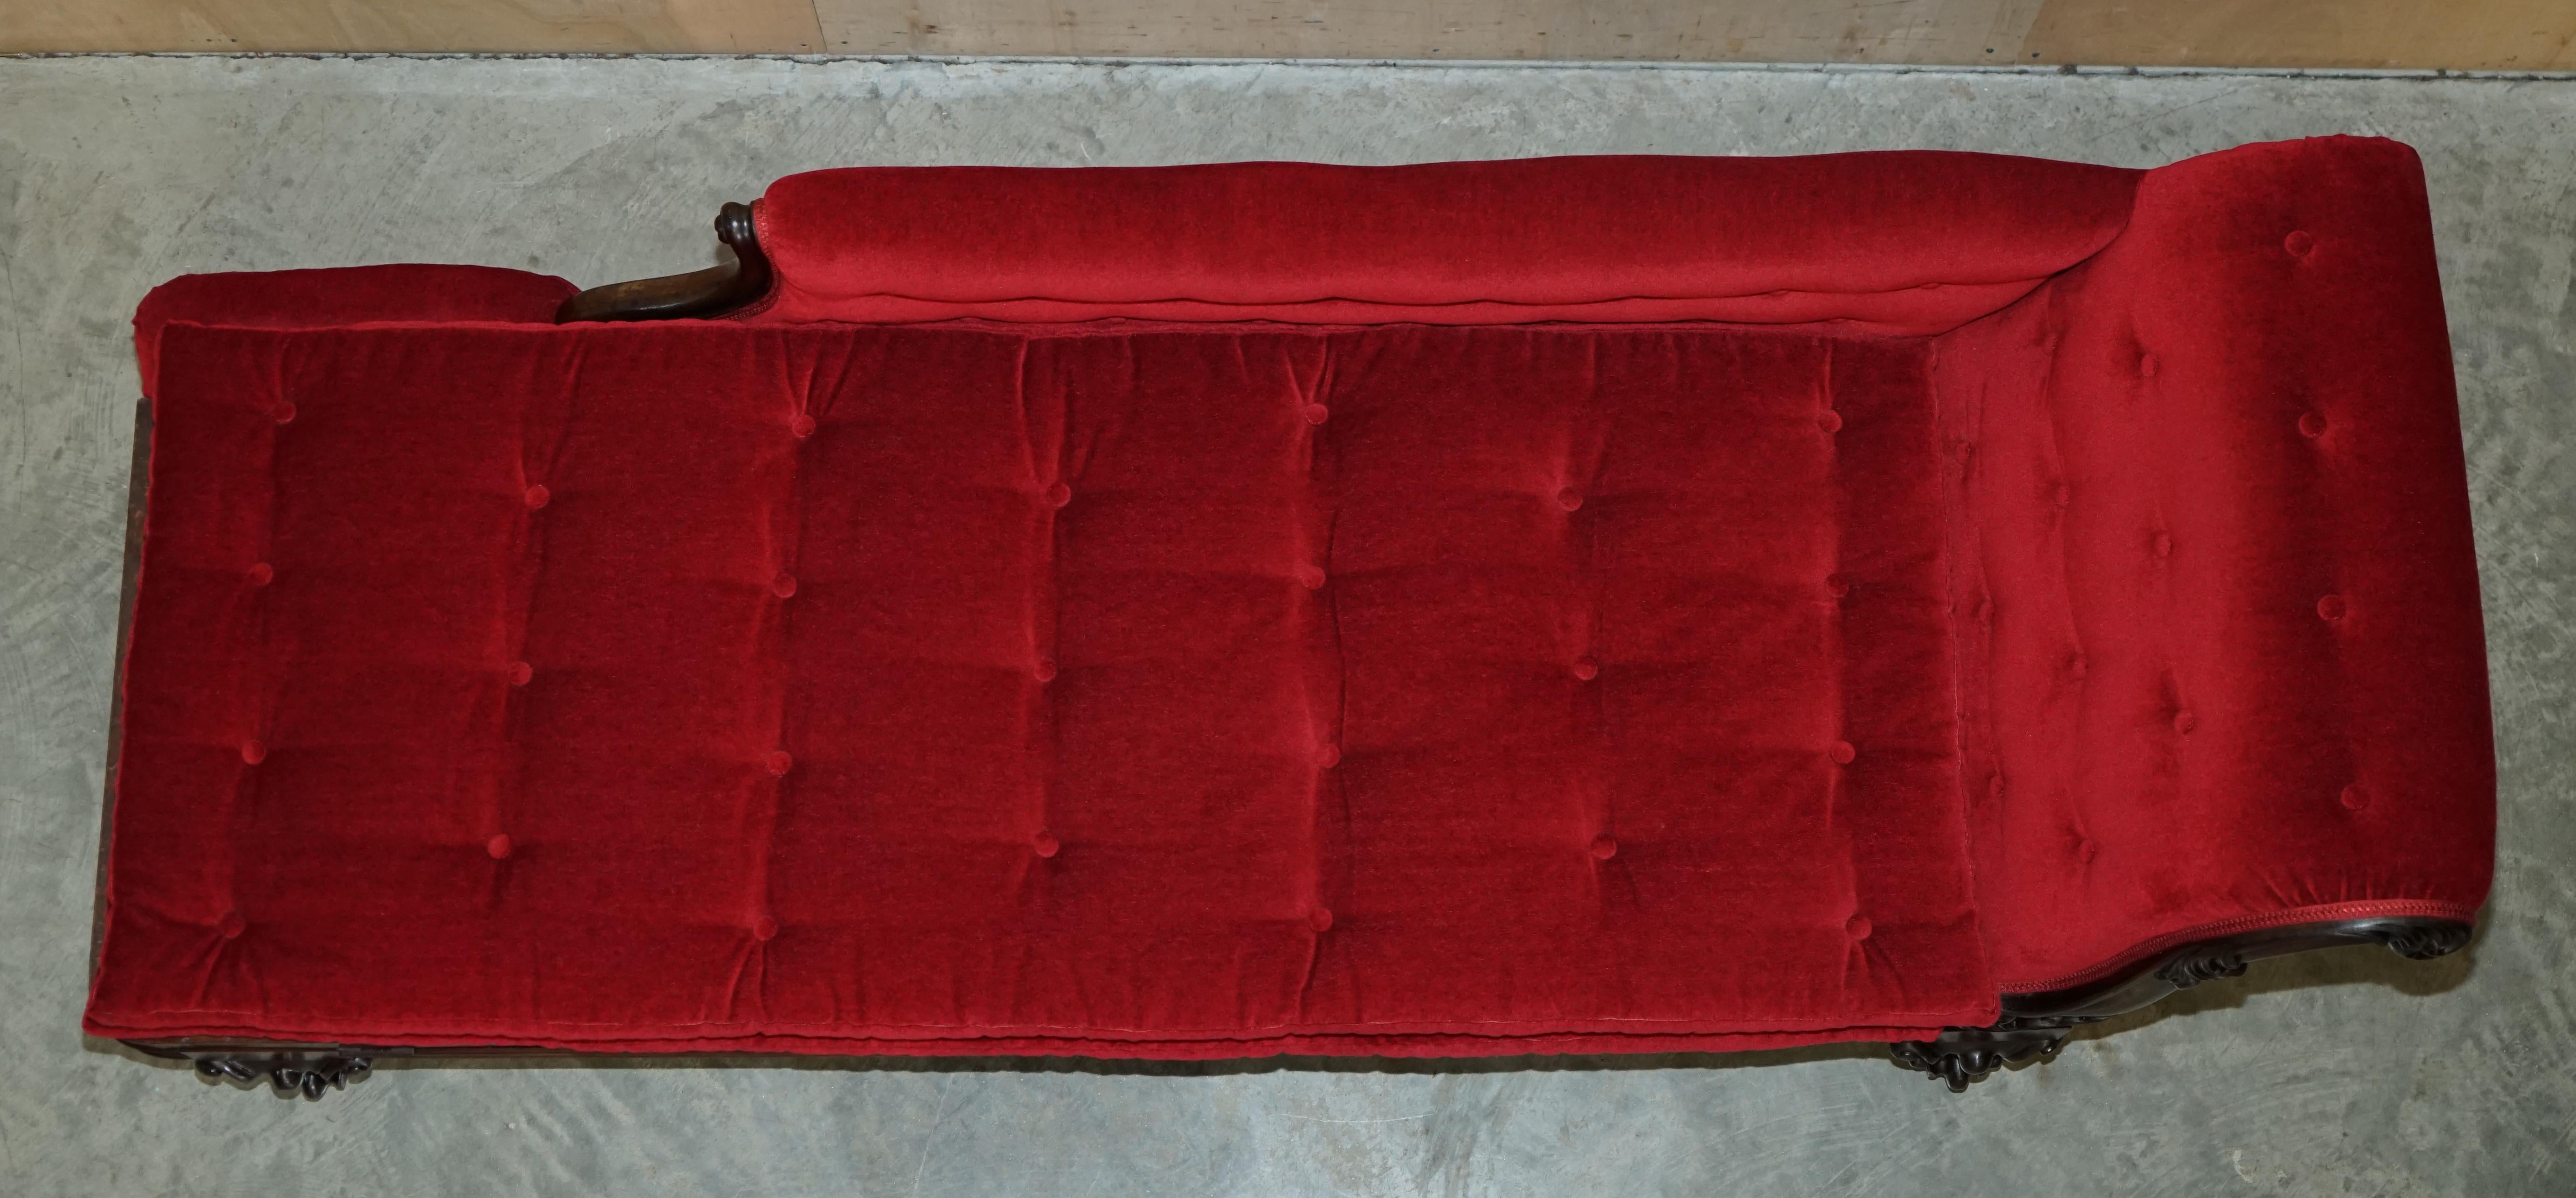 Rare Antique William iv circa 1830 Hardwood Chesterfield Extending Chaise Lounge For Sale 4